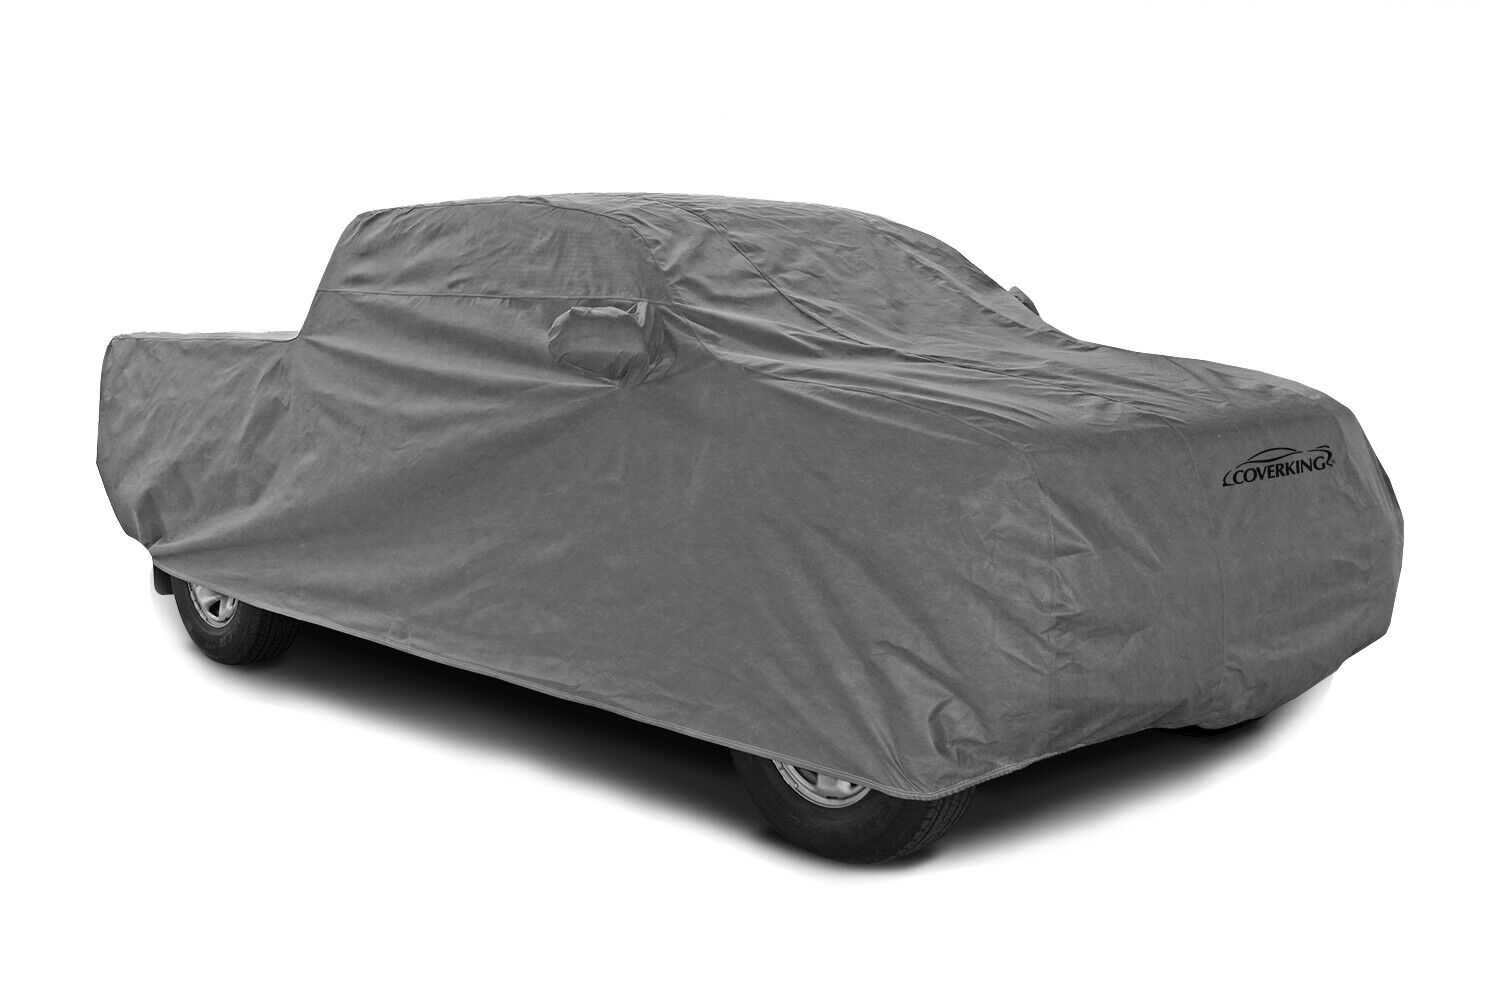 Coverking Triguard Custom Tailored Car Cover for Ford Maverick - Made to Order